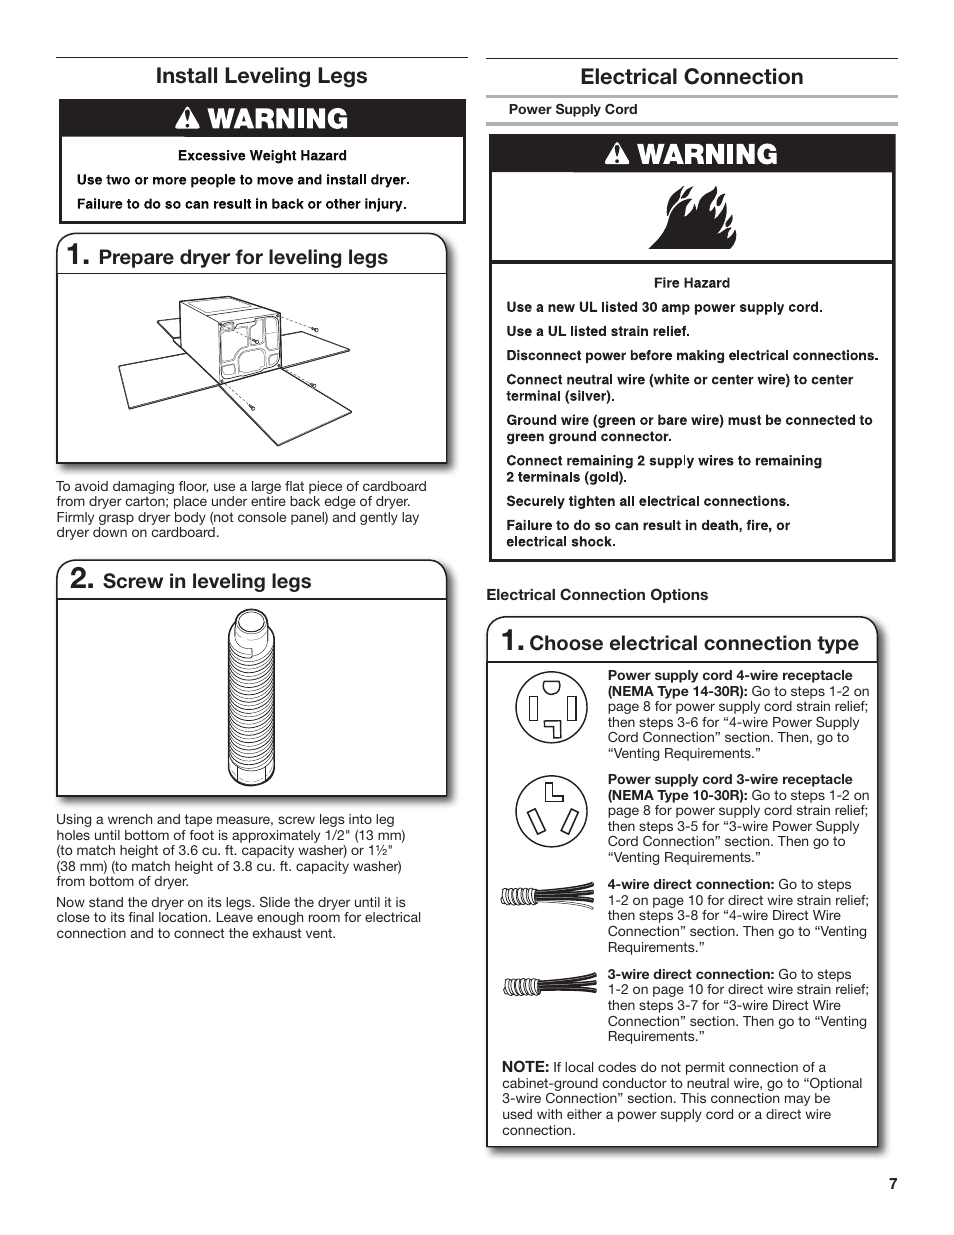 Electrical connection, Install leveling legs, Choose electrical connection type | Prepare dryer for leveling legs, Screw in leveling legs | Maytag WED4890BQ Installation User Manual | Page 7 / 20